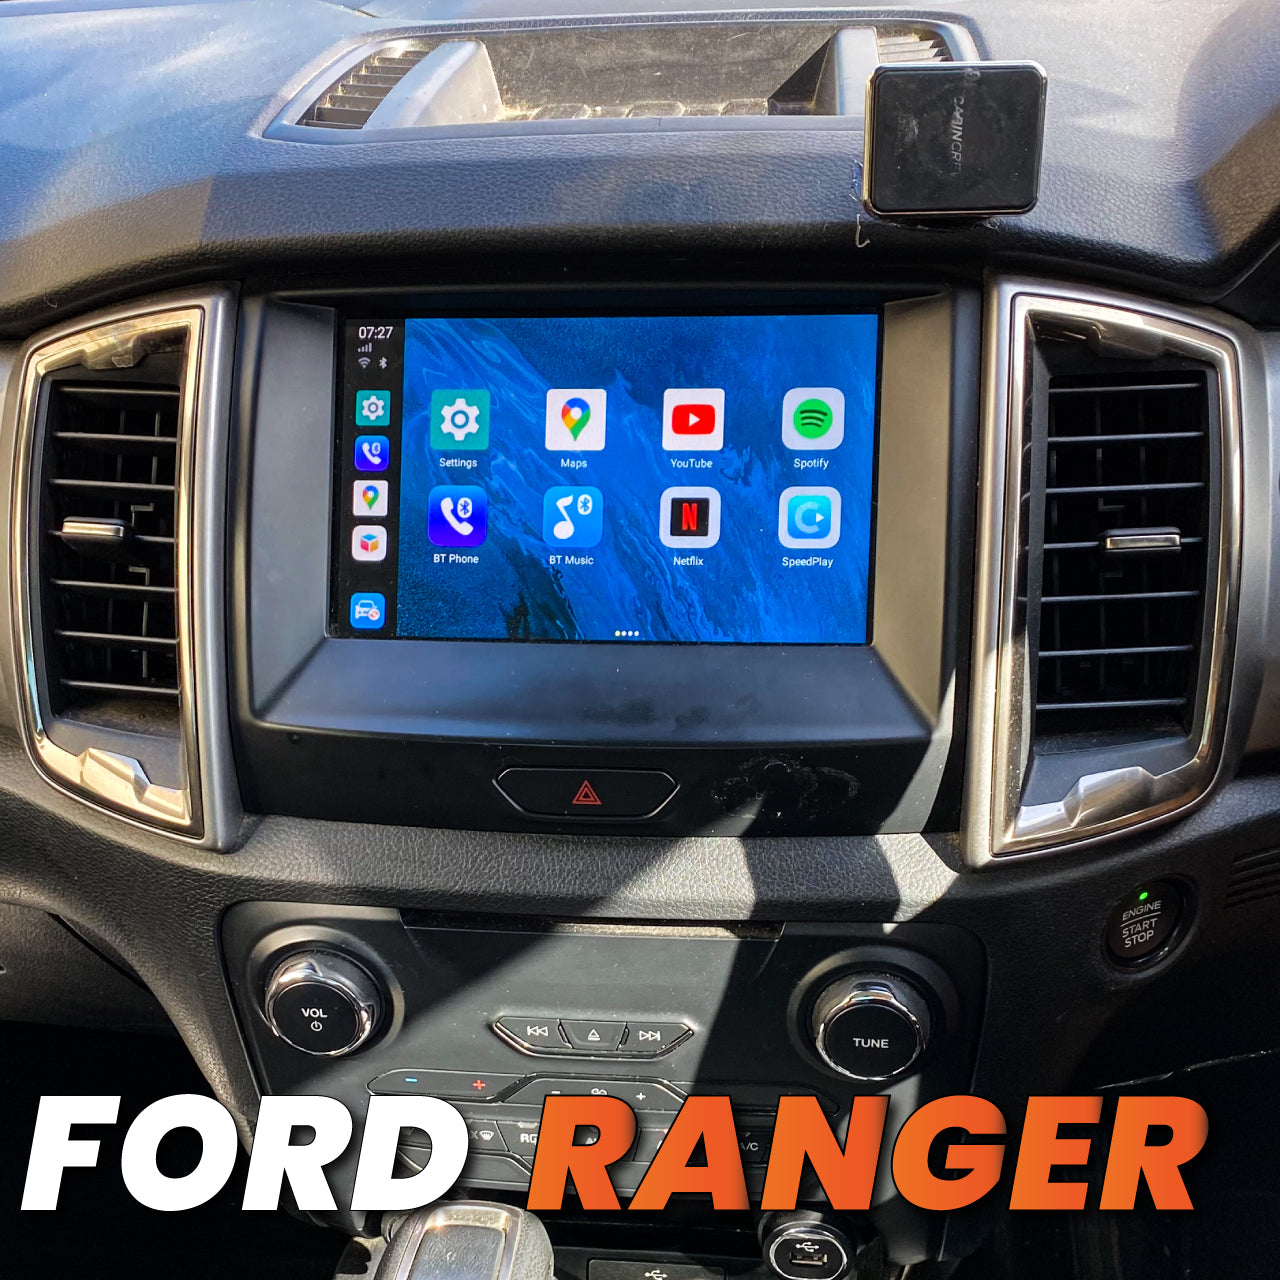 Ford Ranger CarPlay into Android - Any Wired CarPlay